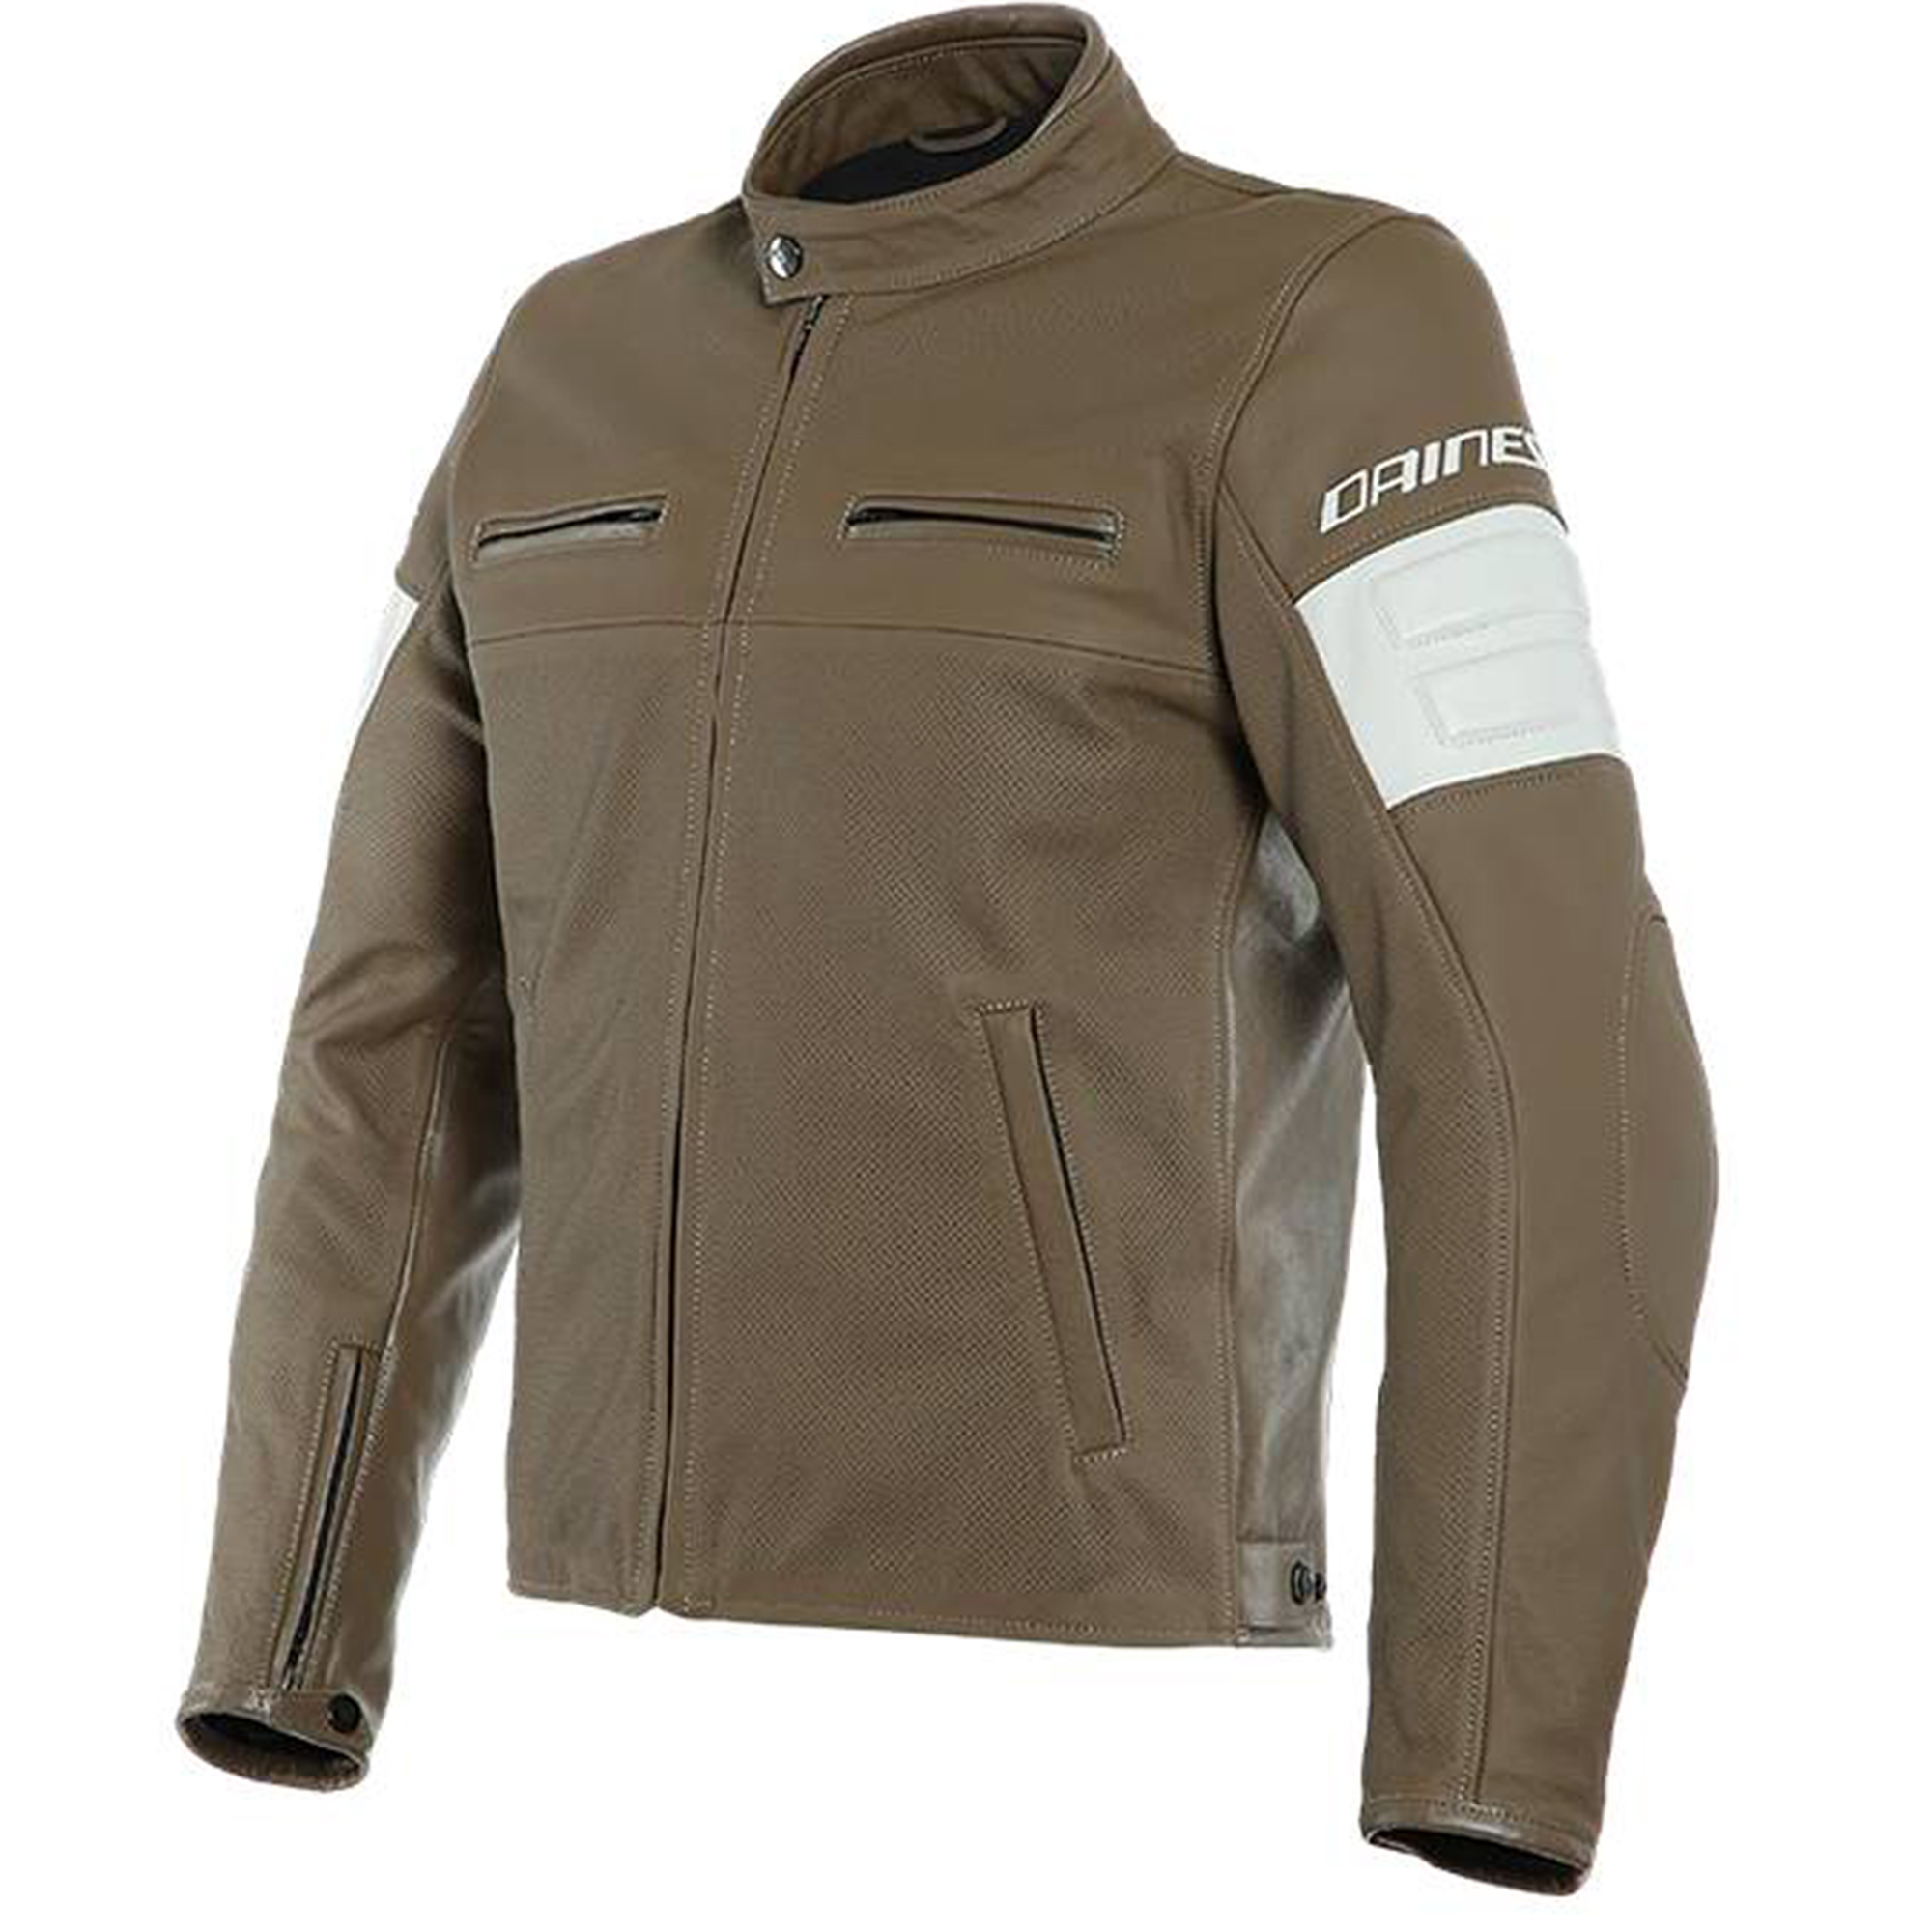 Dainese San Diego Mens Leather Motorcycle Jacket Light Brown | eBay